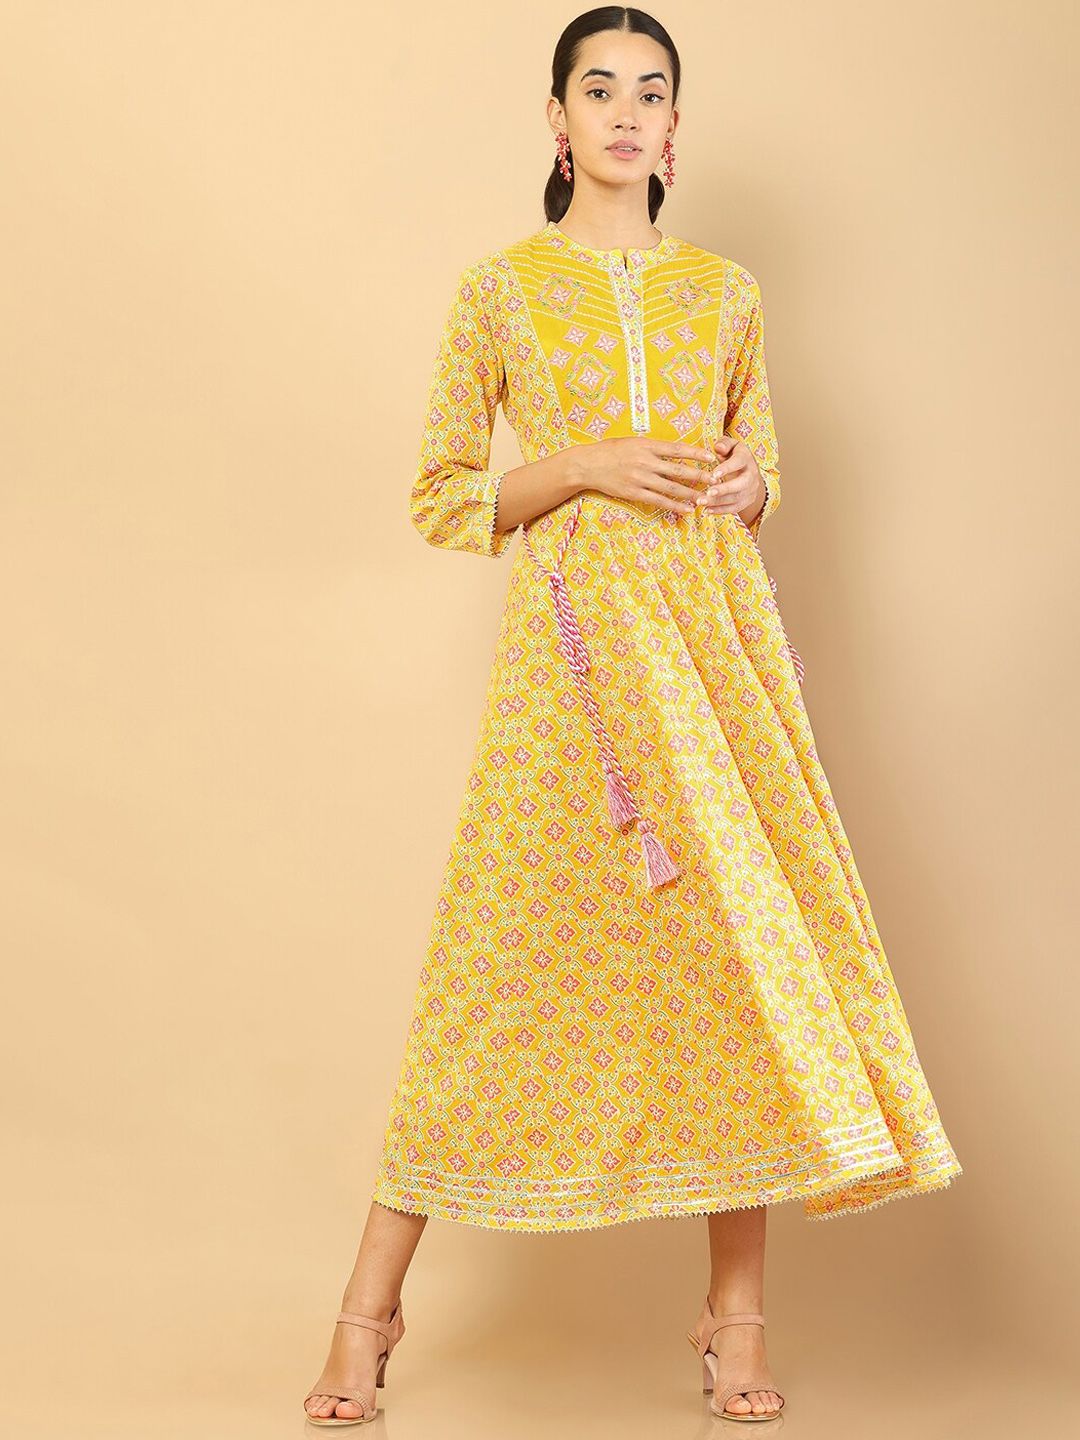 Soch Women Yellow Floral Printed Floral Anarkali Ethnic Dress Price in India